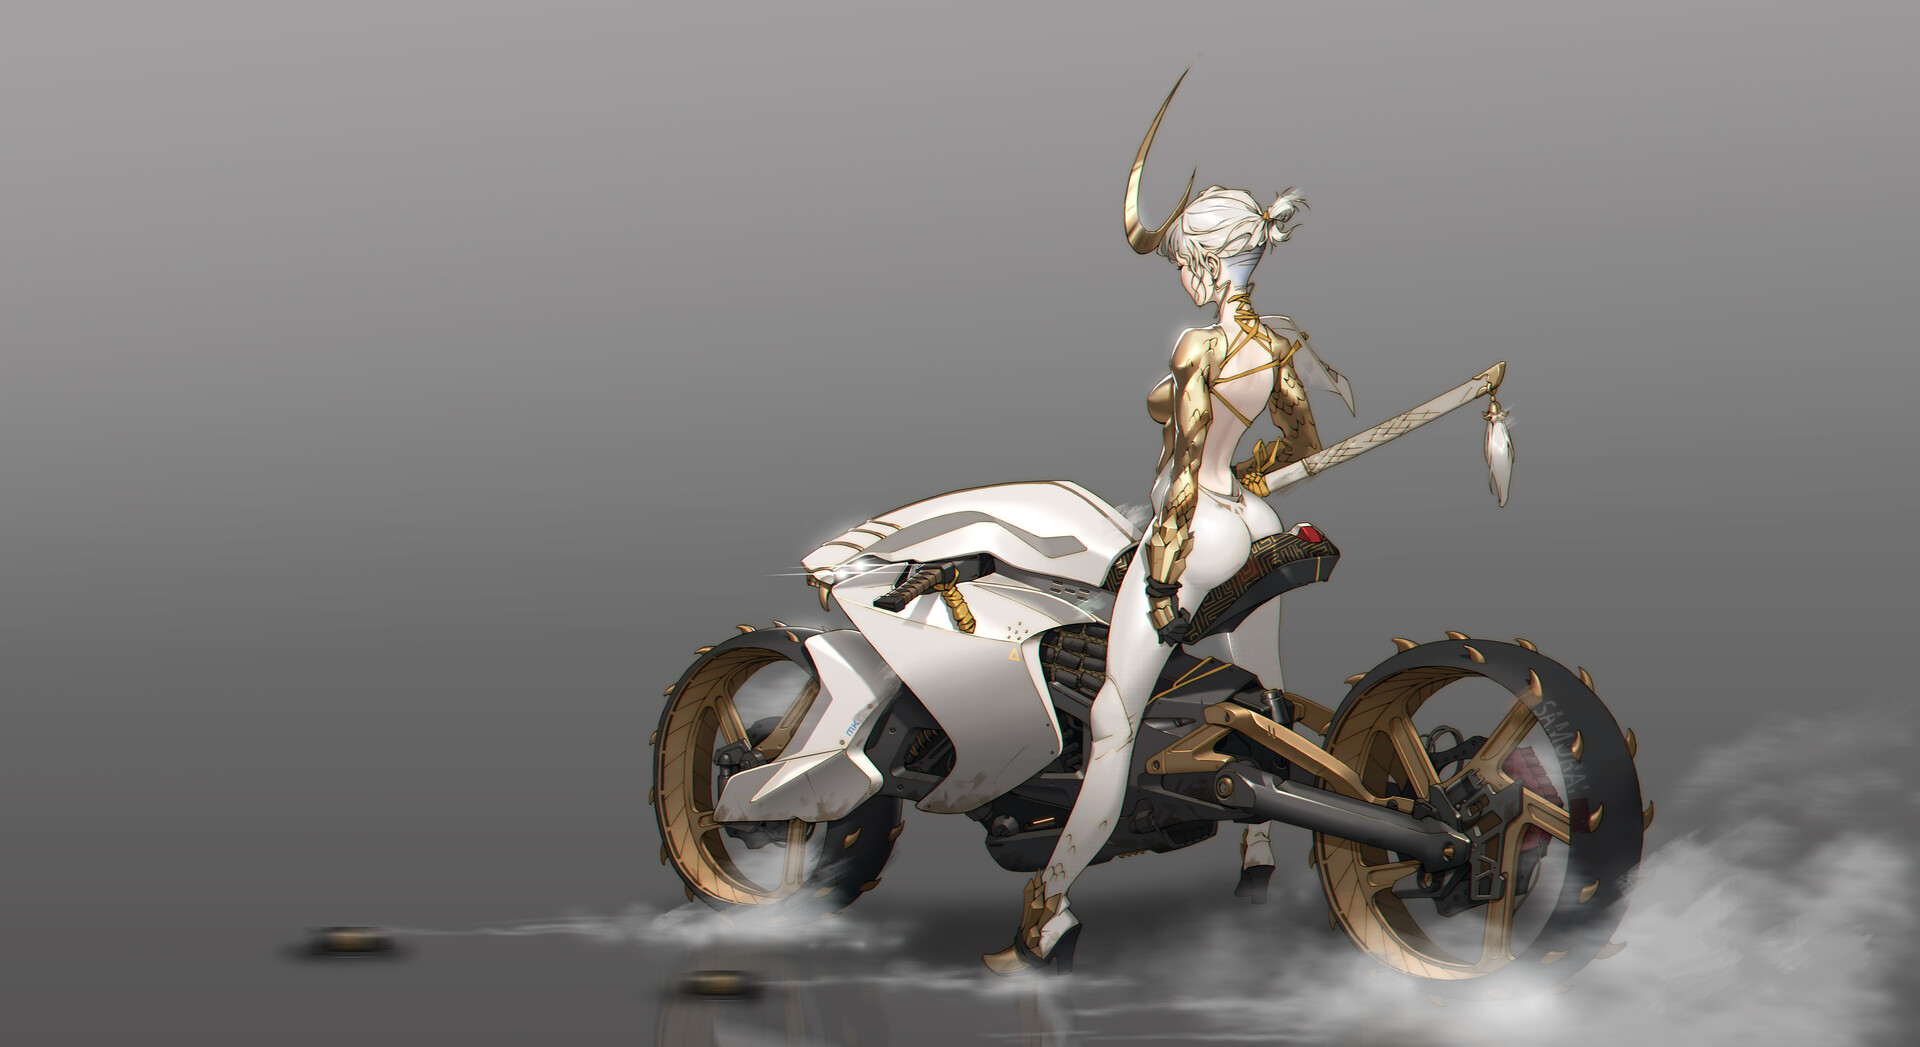 General 1920x1047 artwork ArtStation gray background simple background women motorcycle women with motorcycles vehicle